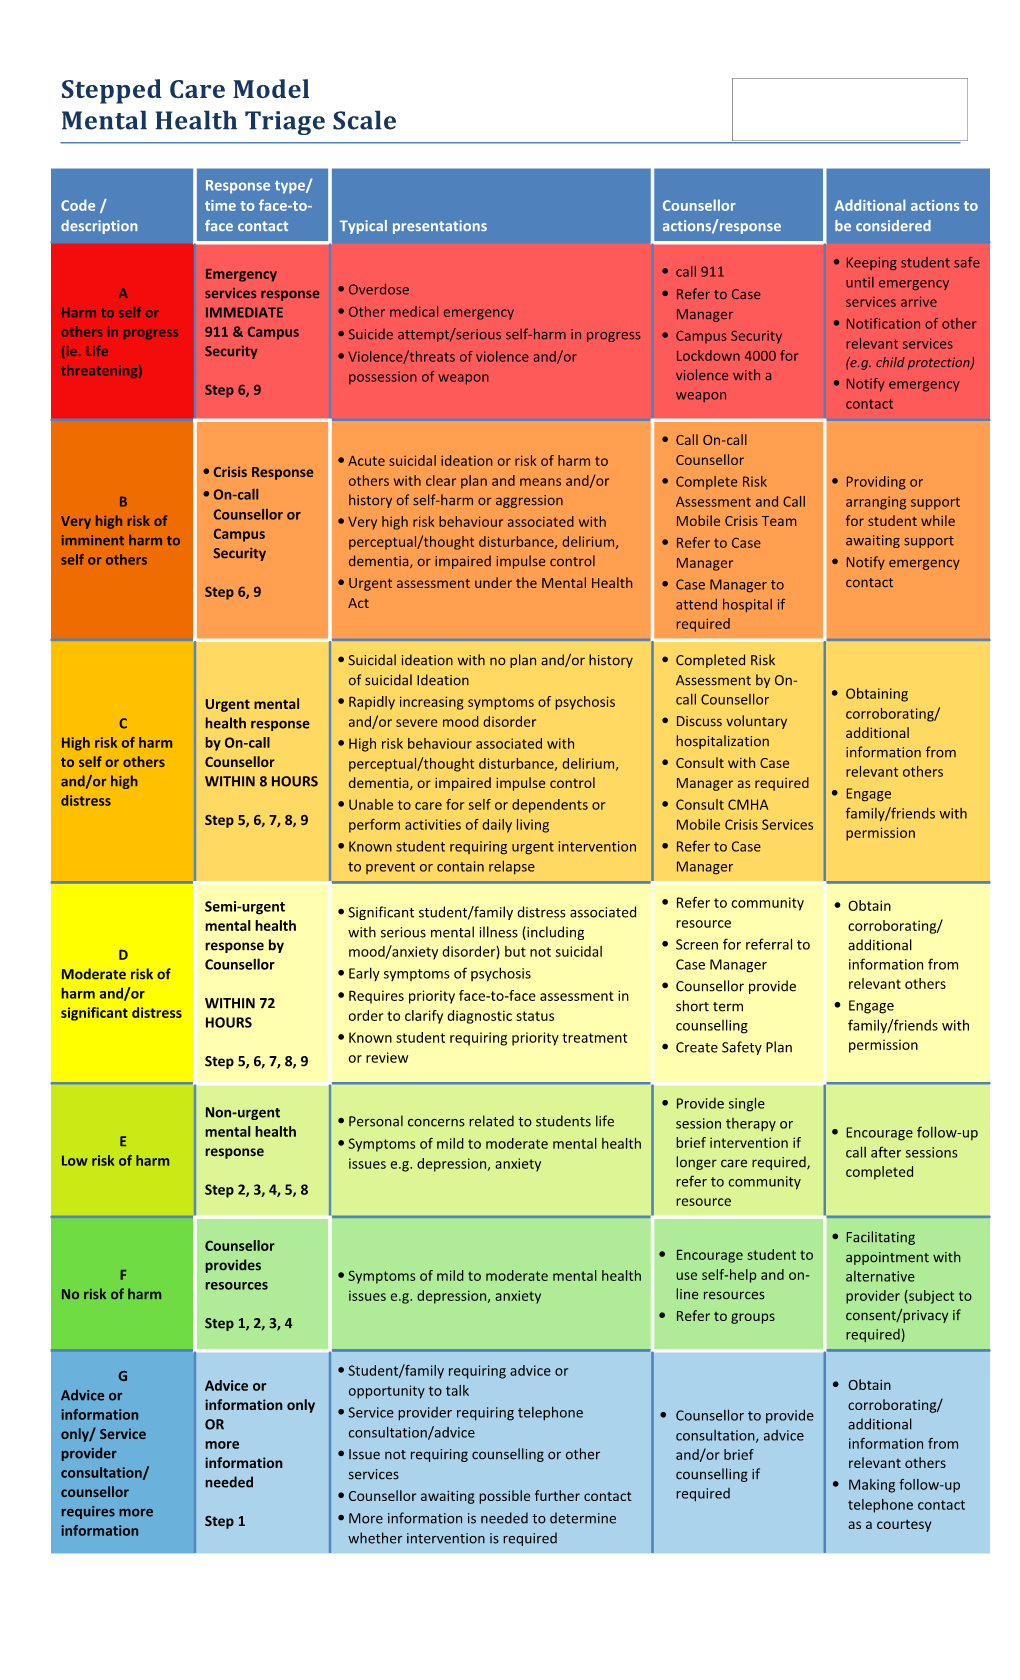 Stepped Care Model Mental Health Triage Scale